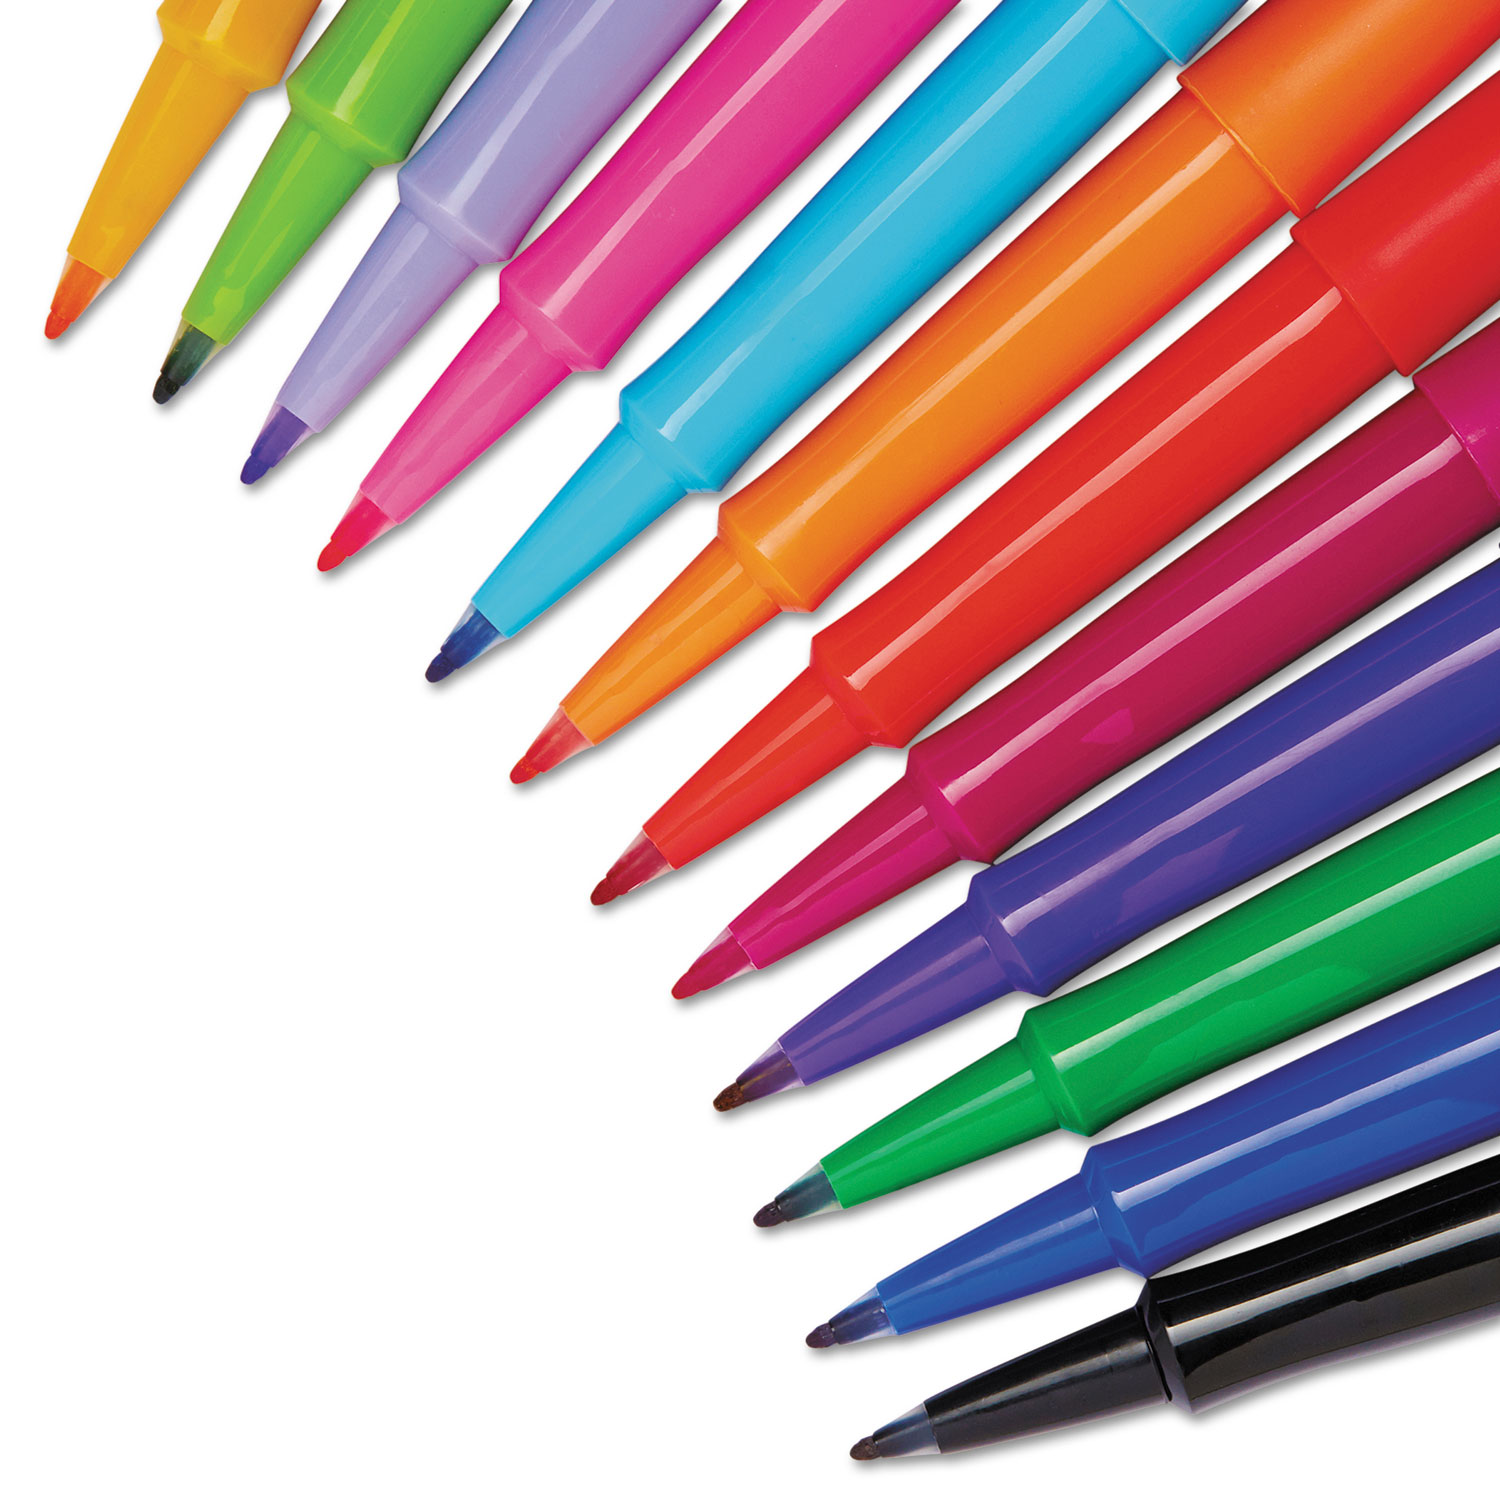 Paper Mate Flair Candy Pop Stick Porous Point Pen, 0.7mm, Assorted Ink/Barrel, 36/Pack